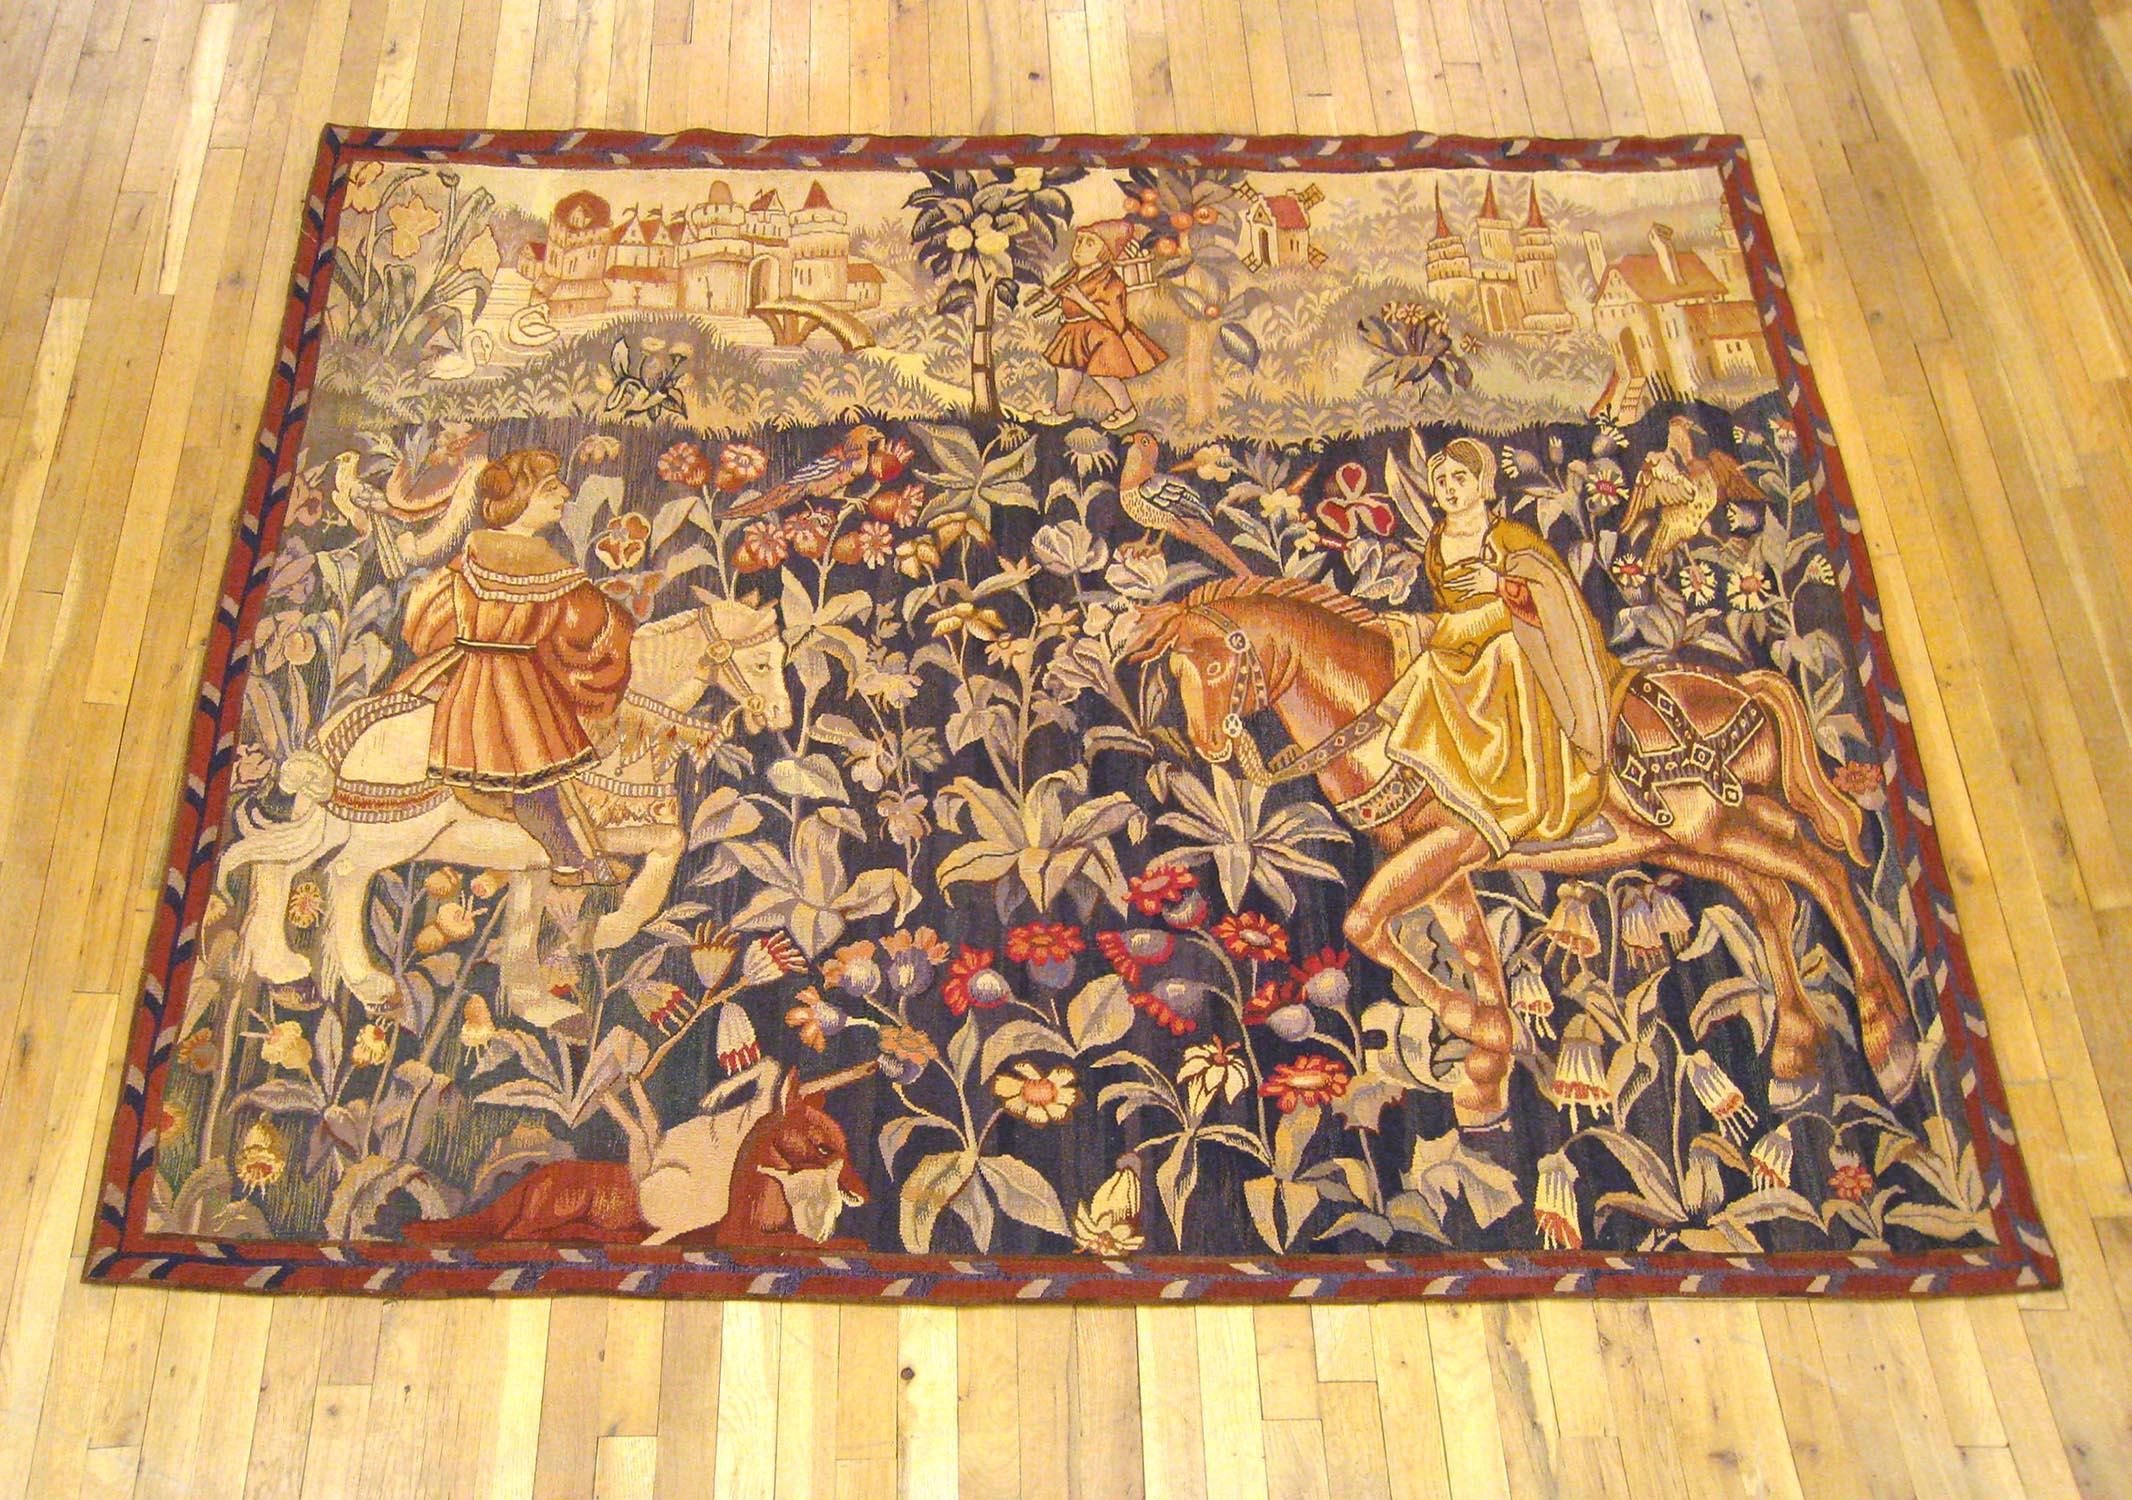 A French tapestry from the end of the 19th century or the turn of the century, presenting an aristocratic hunting scene in a mille fleurs setting, with a nobleman and a noblewoman astride horses at left and right, respectively, a hound with its